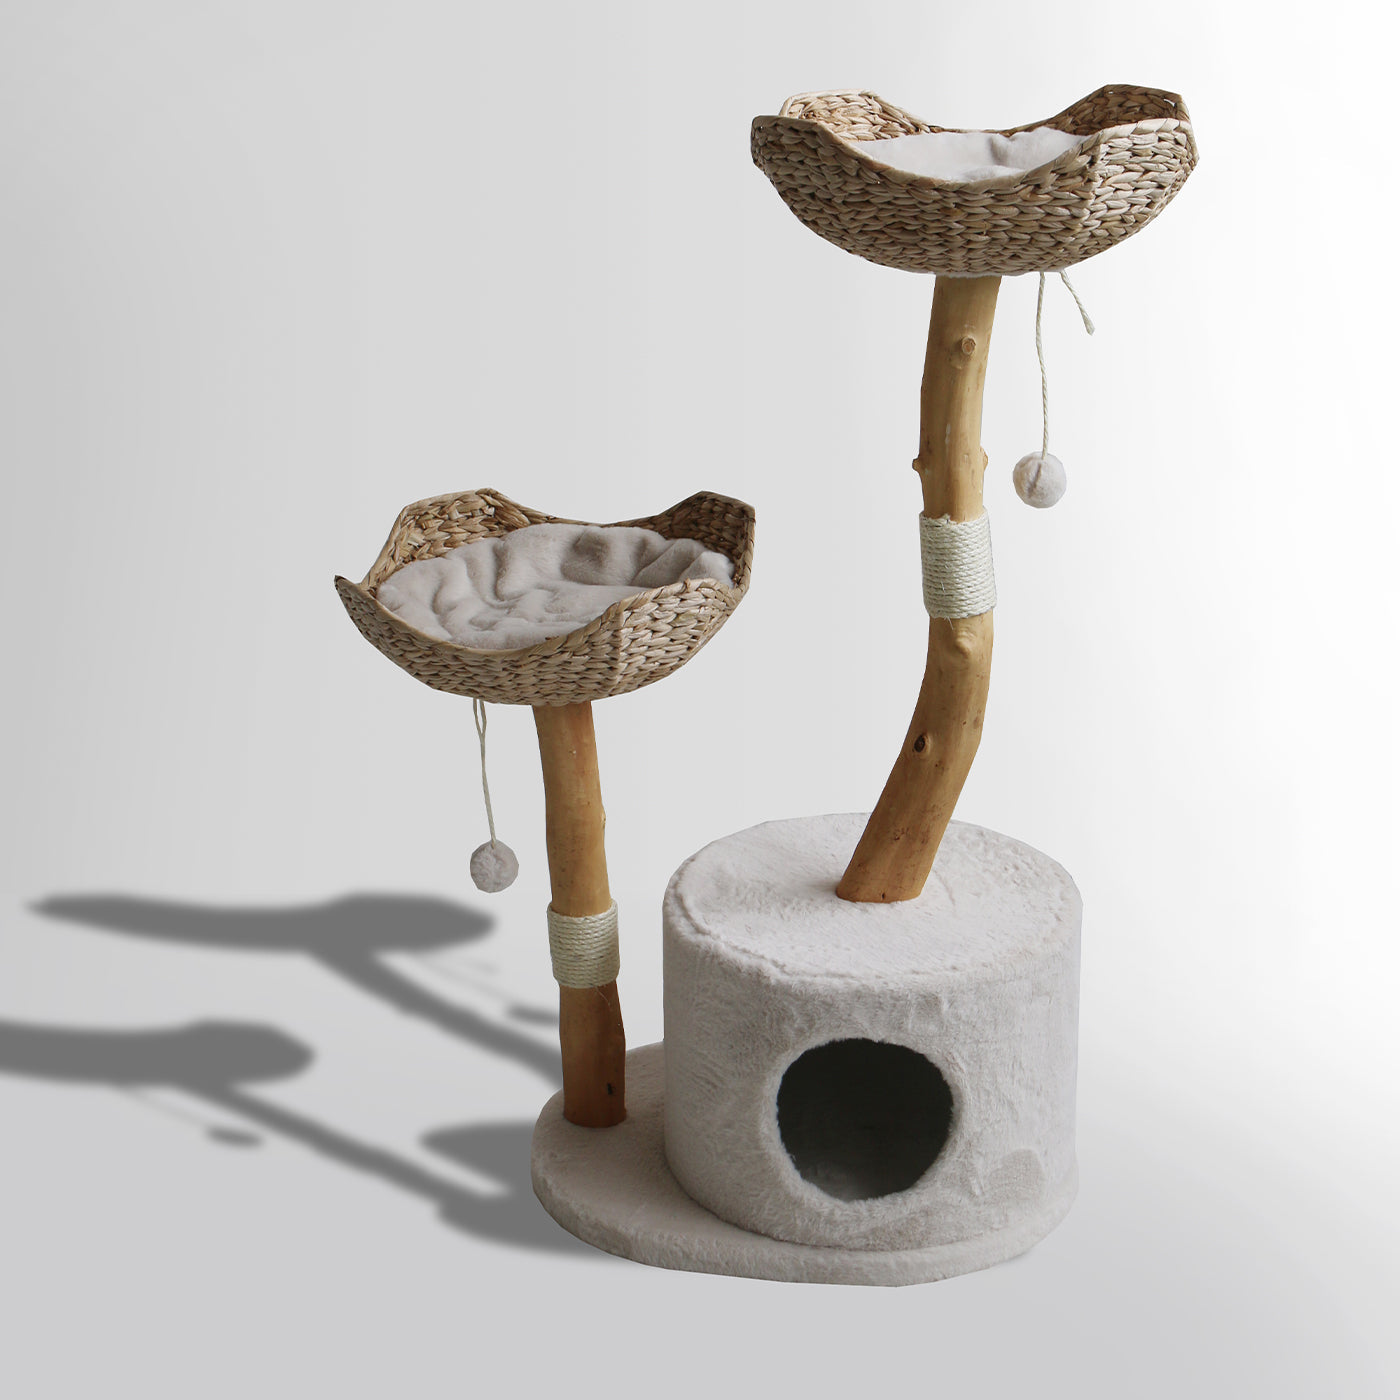 Discover our Luxury Back to Nature The Basket Cat Scratch Post. The Features of the Cat Scratch Post include Cozy Basket, Cave for Sleeping & Dangling Toys to Encourage Play, The Perfect Burrow For Your Kitten and Cat, Weight limit 20kg, Available Now at Lords & Labradors US